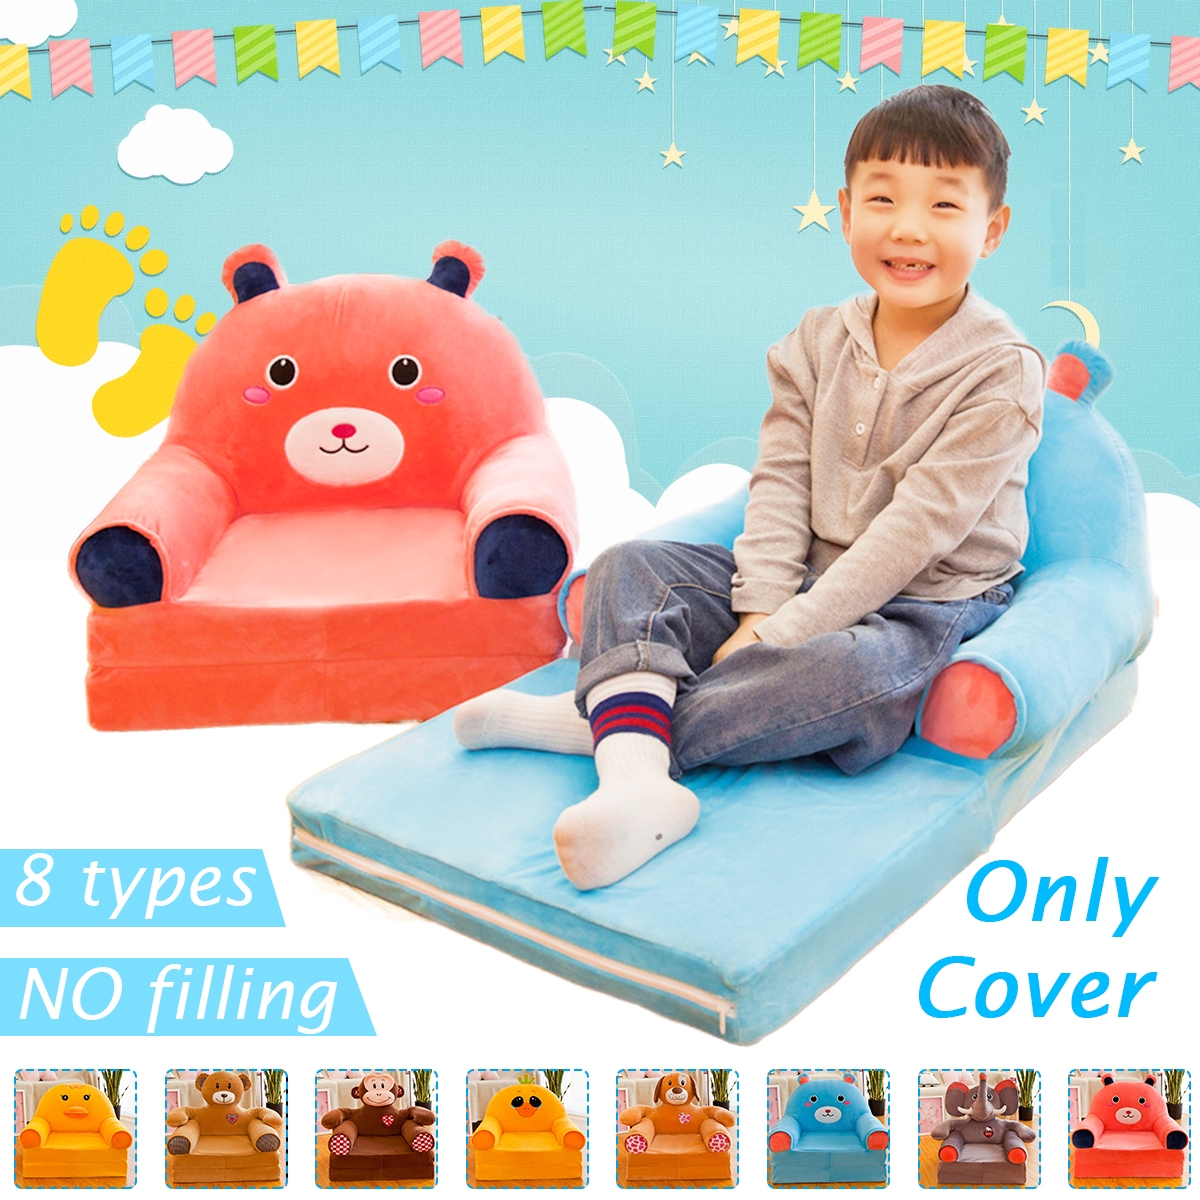 Cartoon Cute Foldable Baby Sofa Cover No Filling Baby Seat Lazy Person Chair Toys